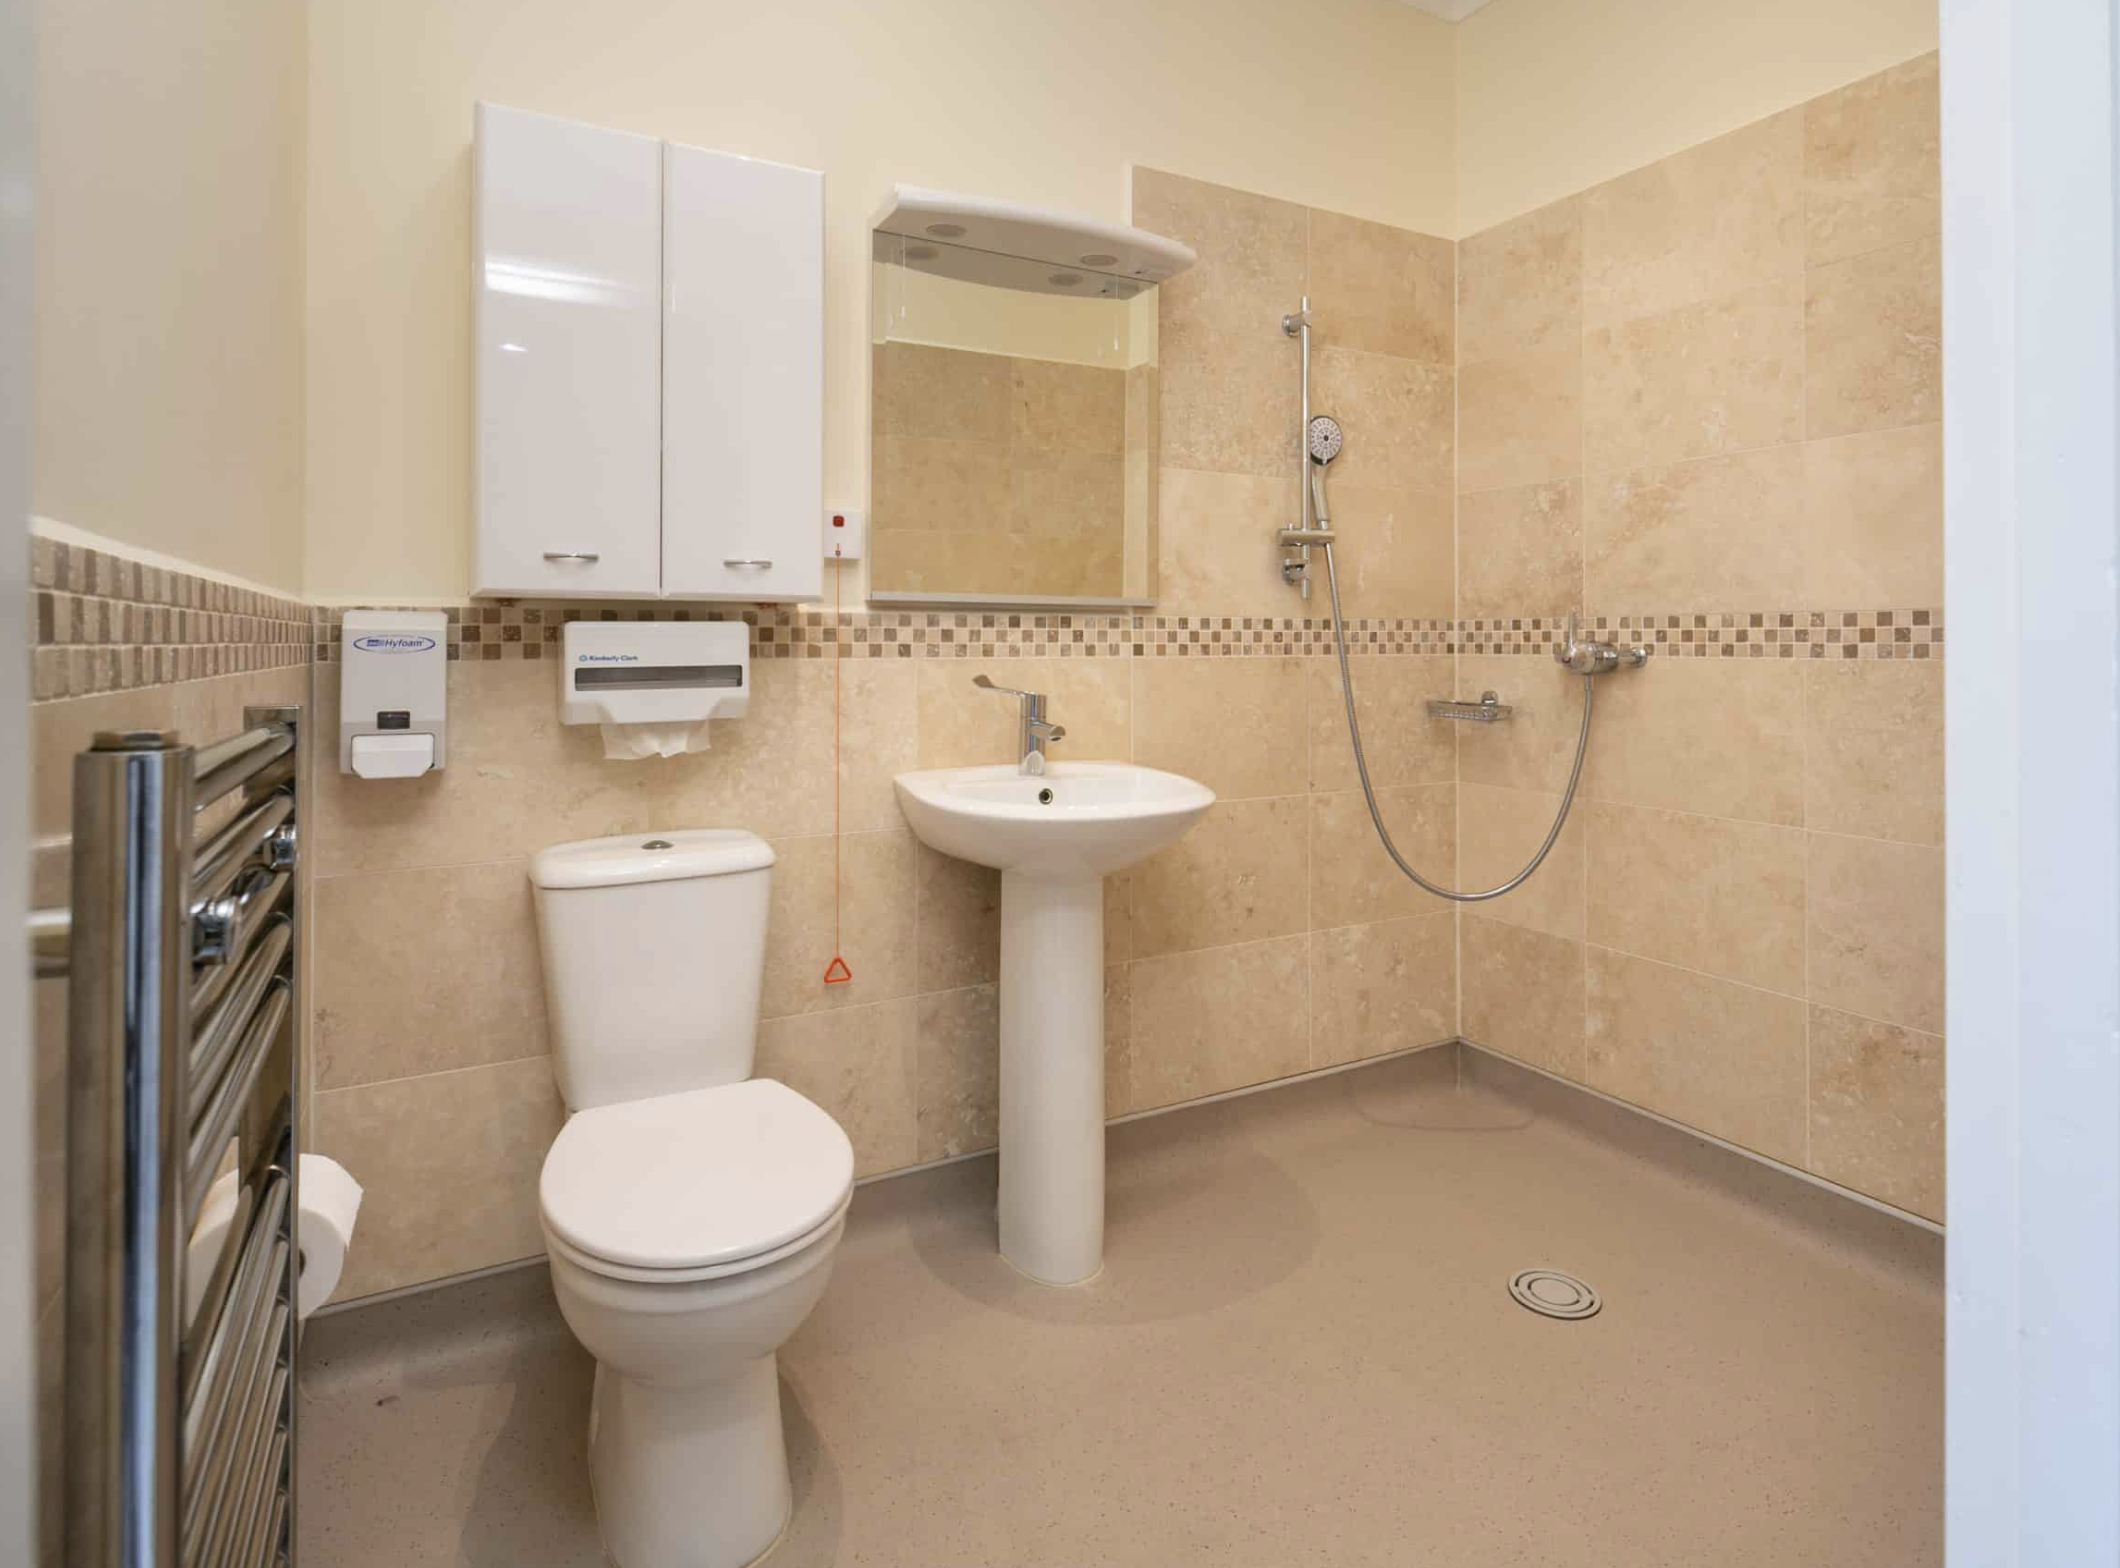 Bathroom of Birtley House care home in Guildford, Surrey